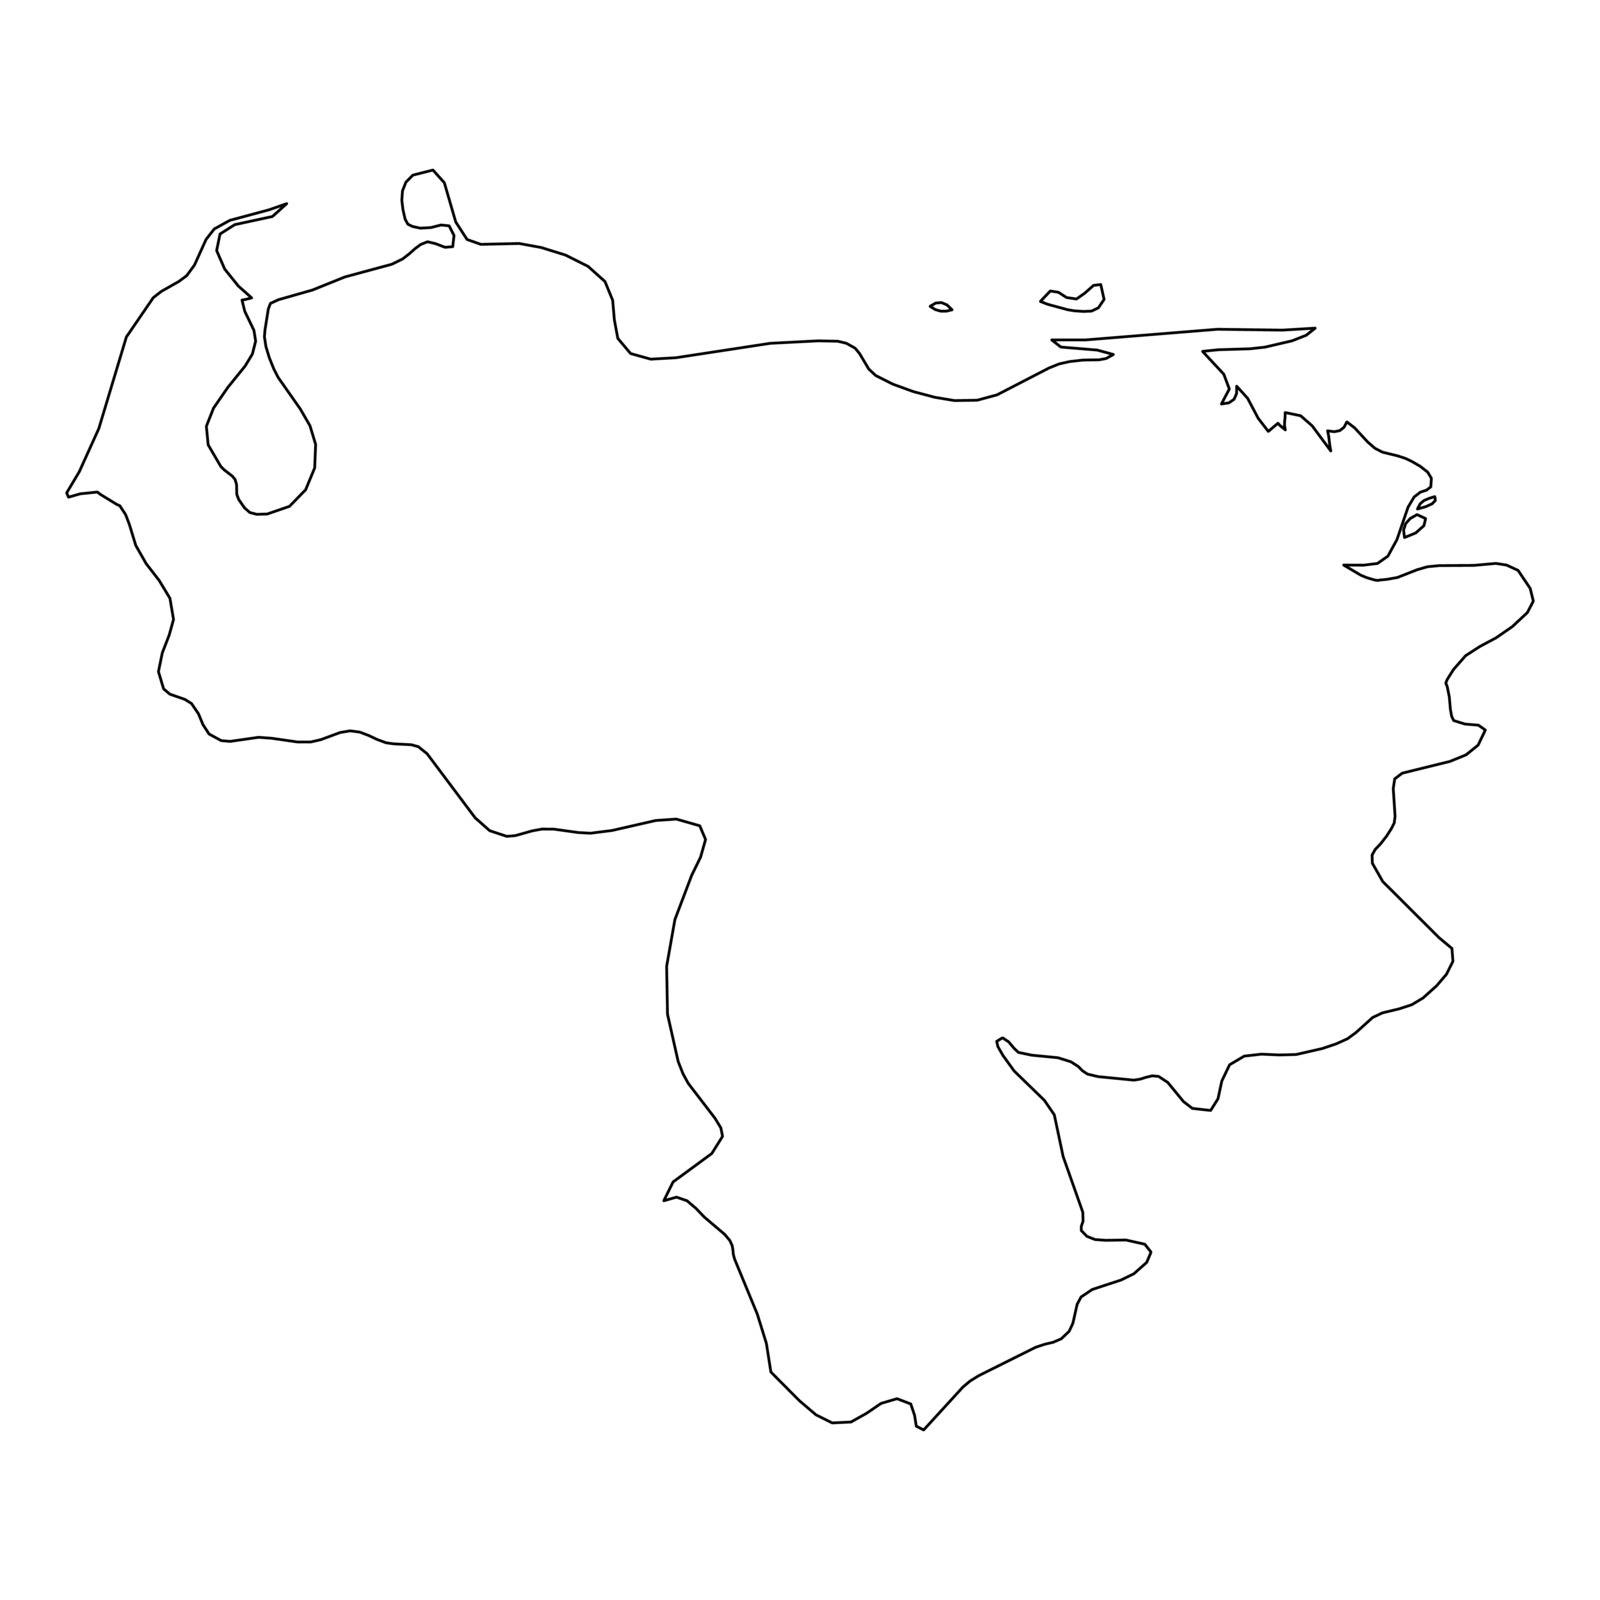 Venezuela - solid black outline border map of country area. Simple flat vector illustration by pyty